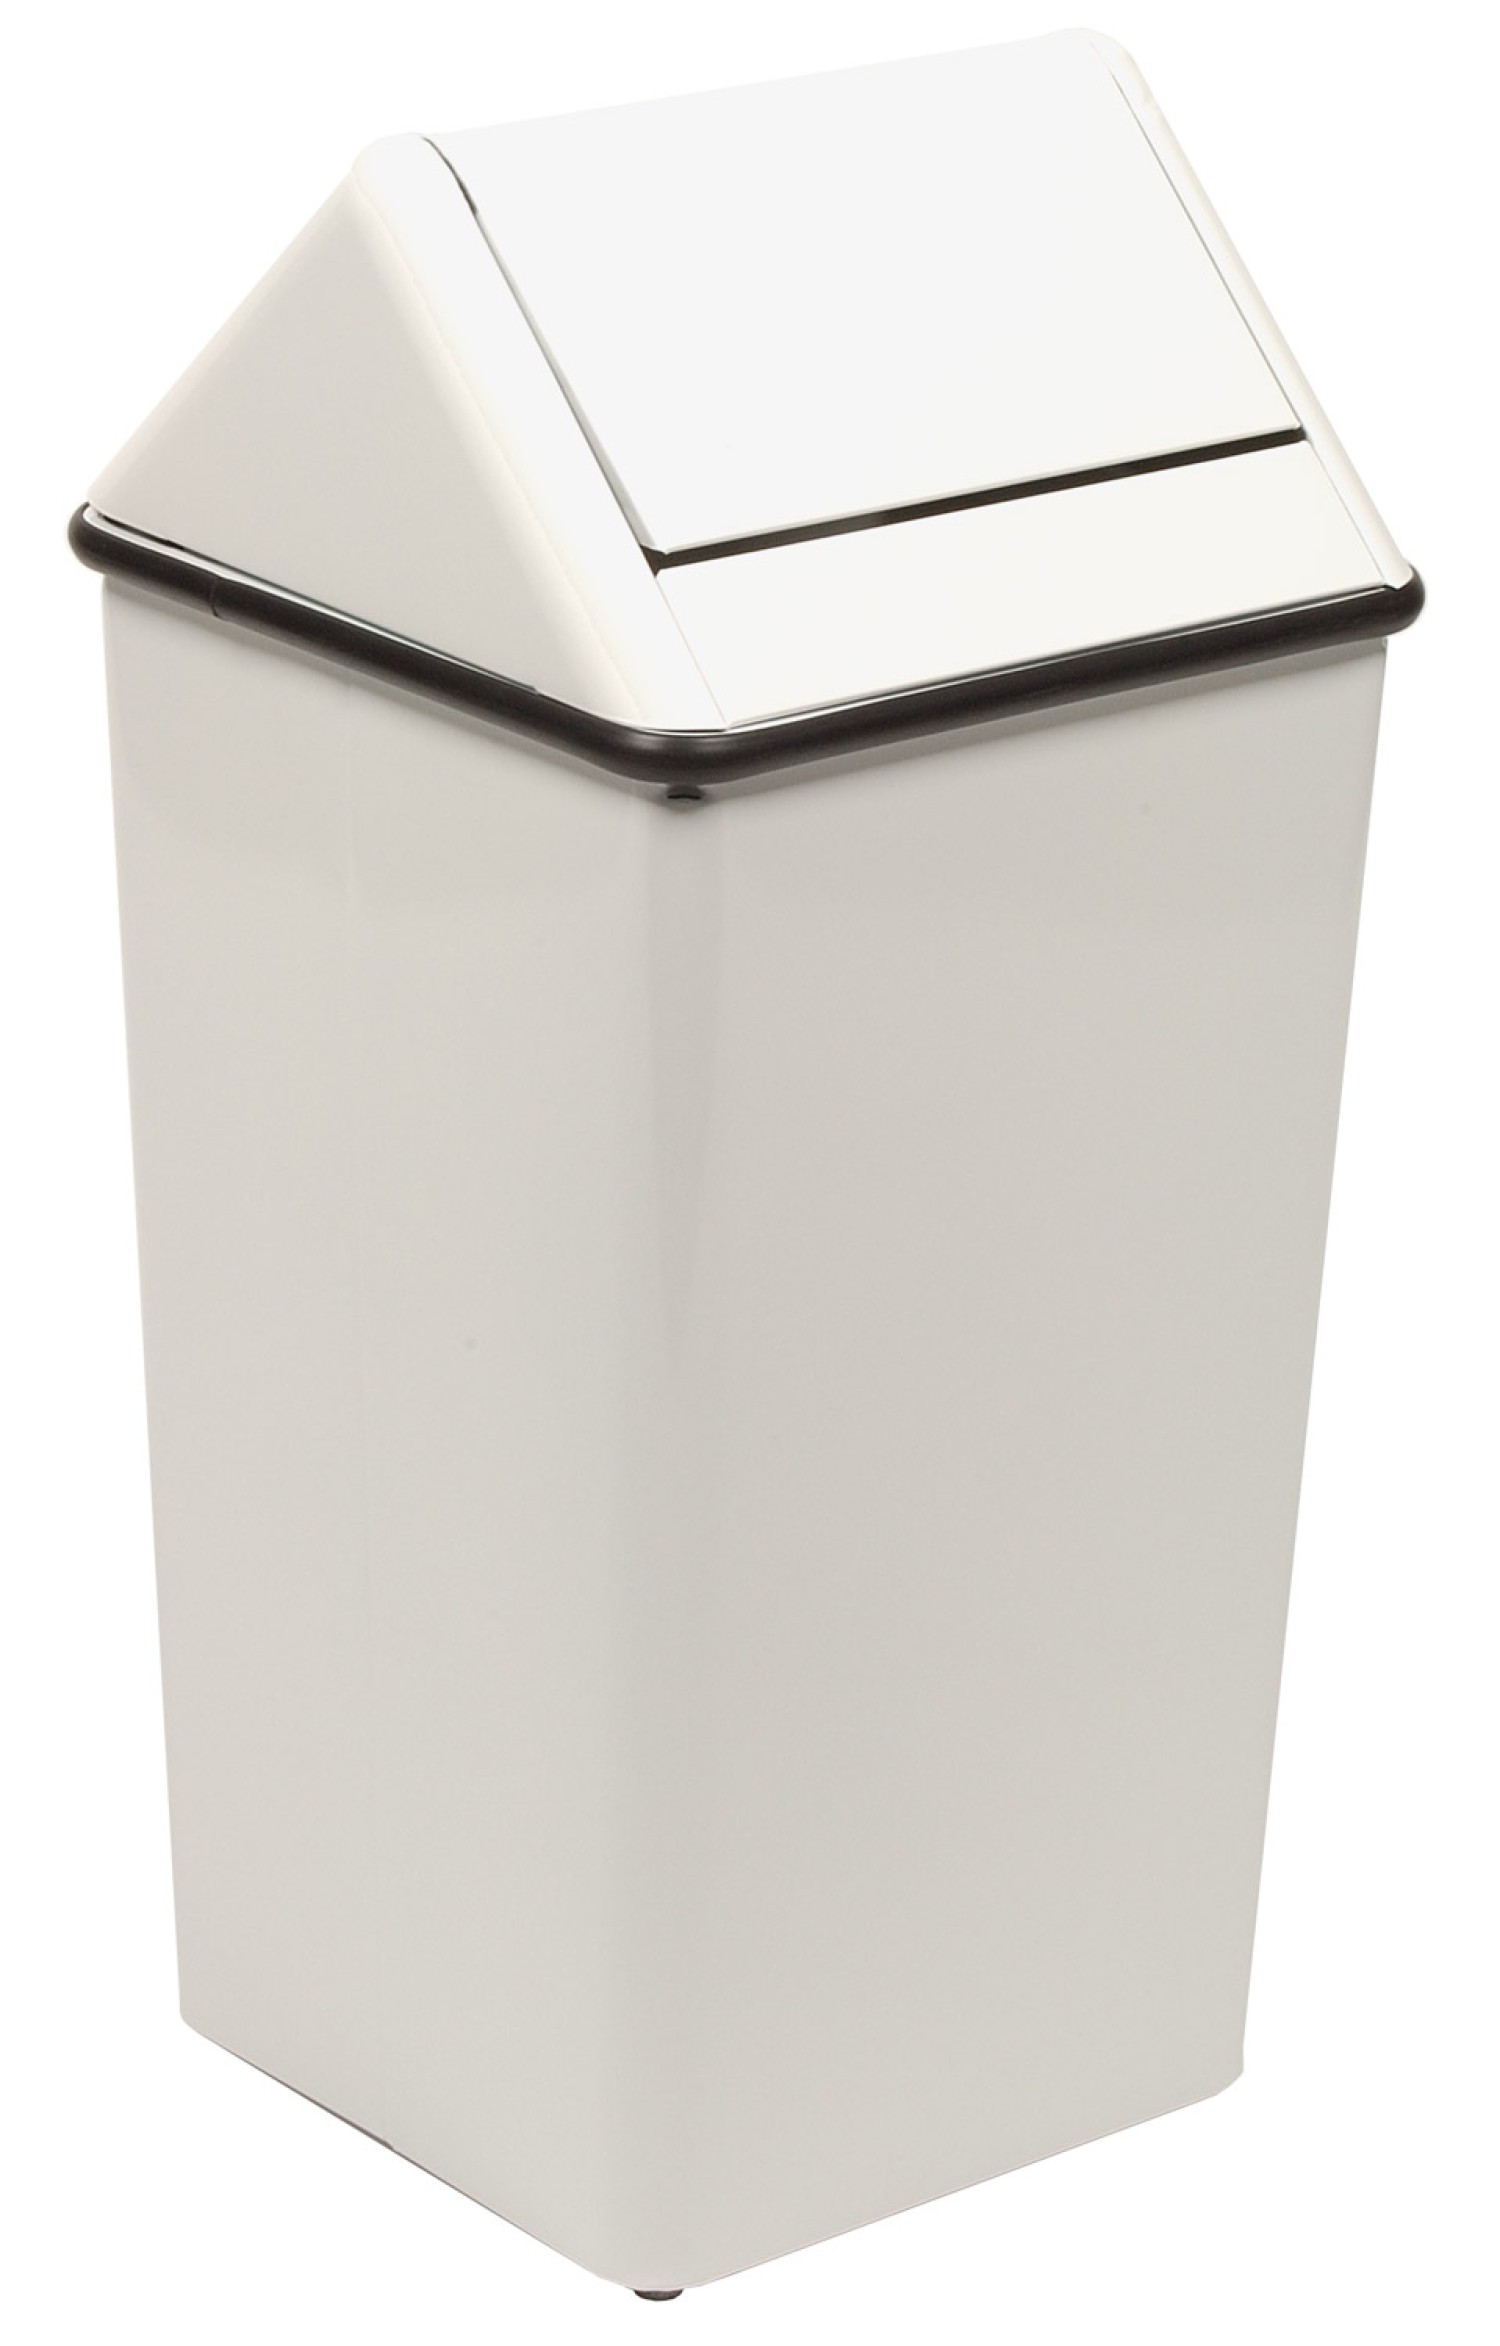 Witt Stainless Steel Square Swing Top Trash Can, 36 Gallon